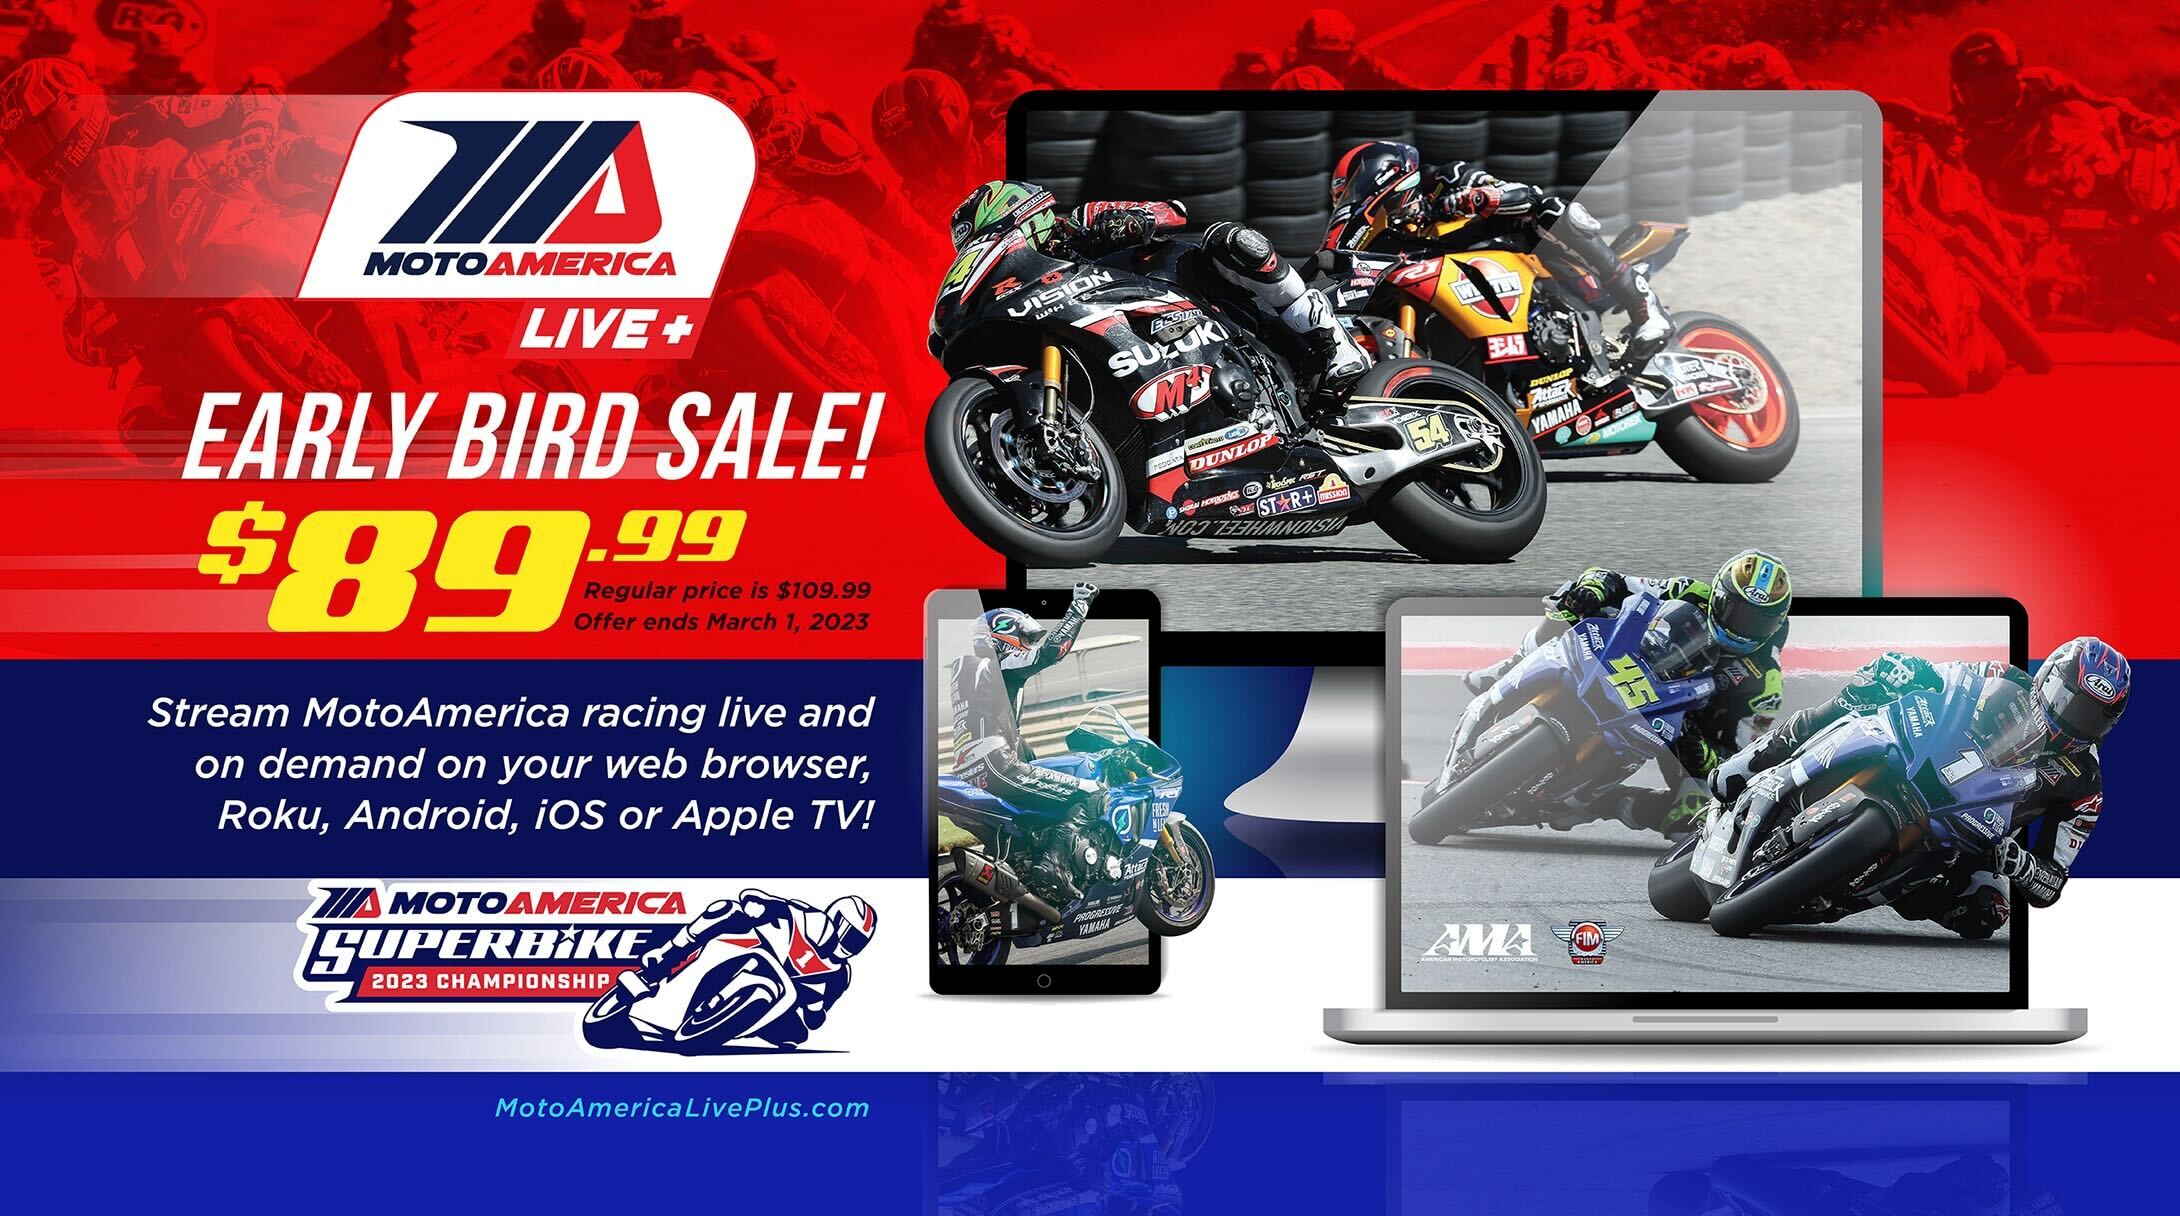 Get It While Its Hot (And Cheaper) MotoAmerica Live+